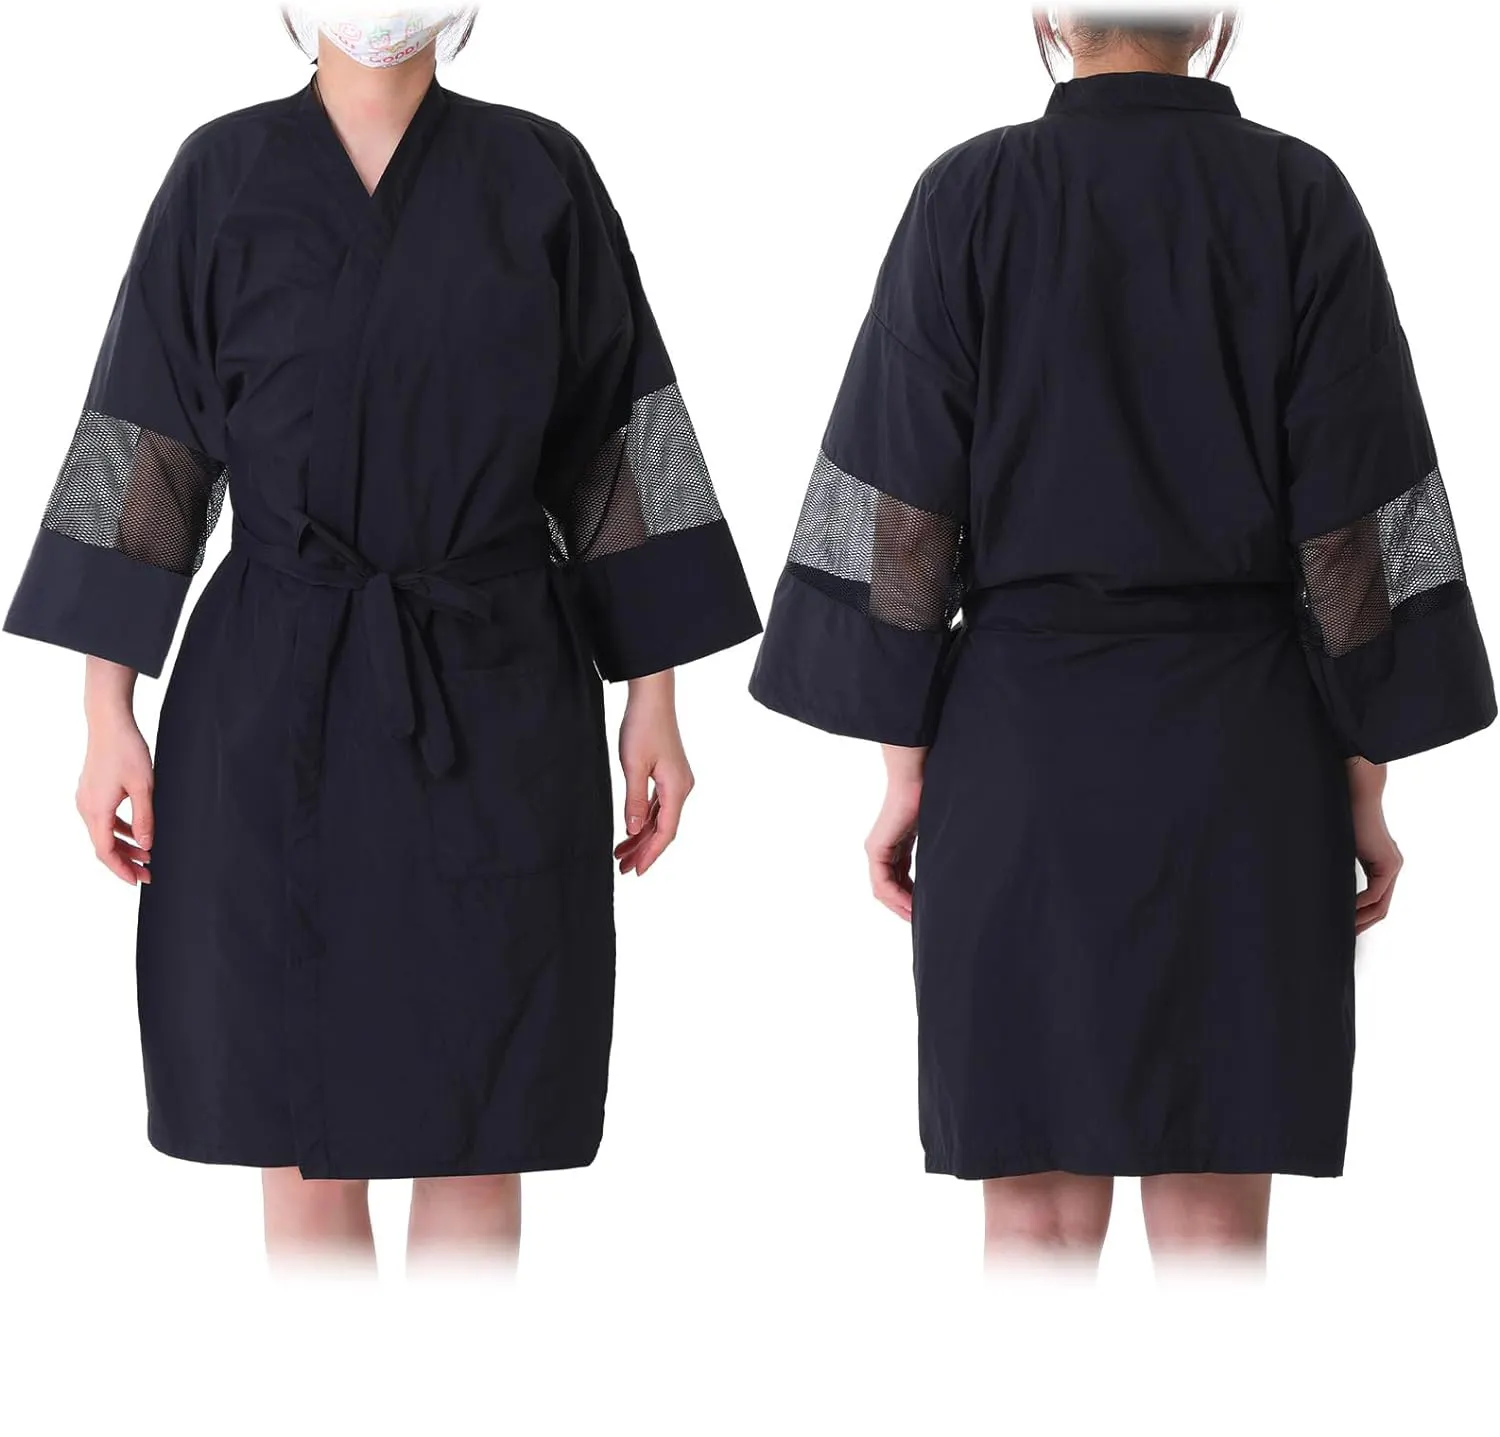 Waterproof High Quality Salon Client Gowns and Robes\Professional Salon Daily Used Polyester Gowns